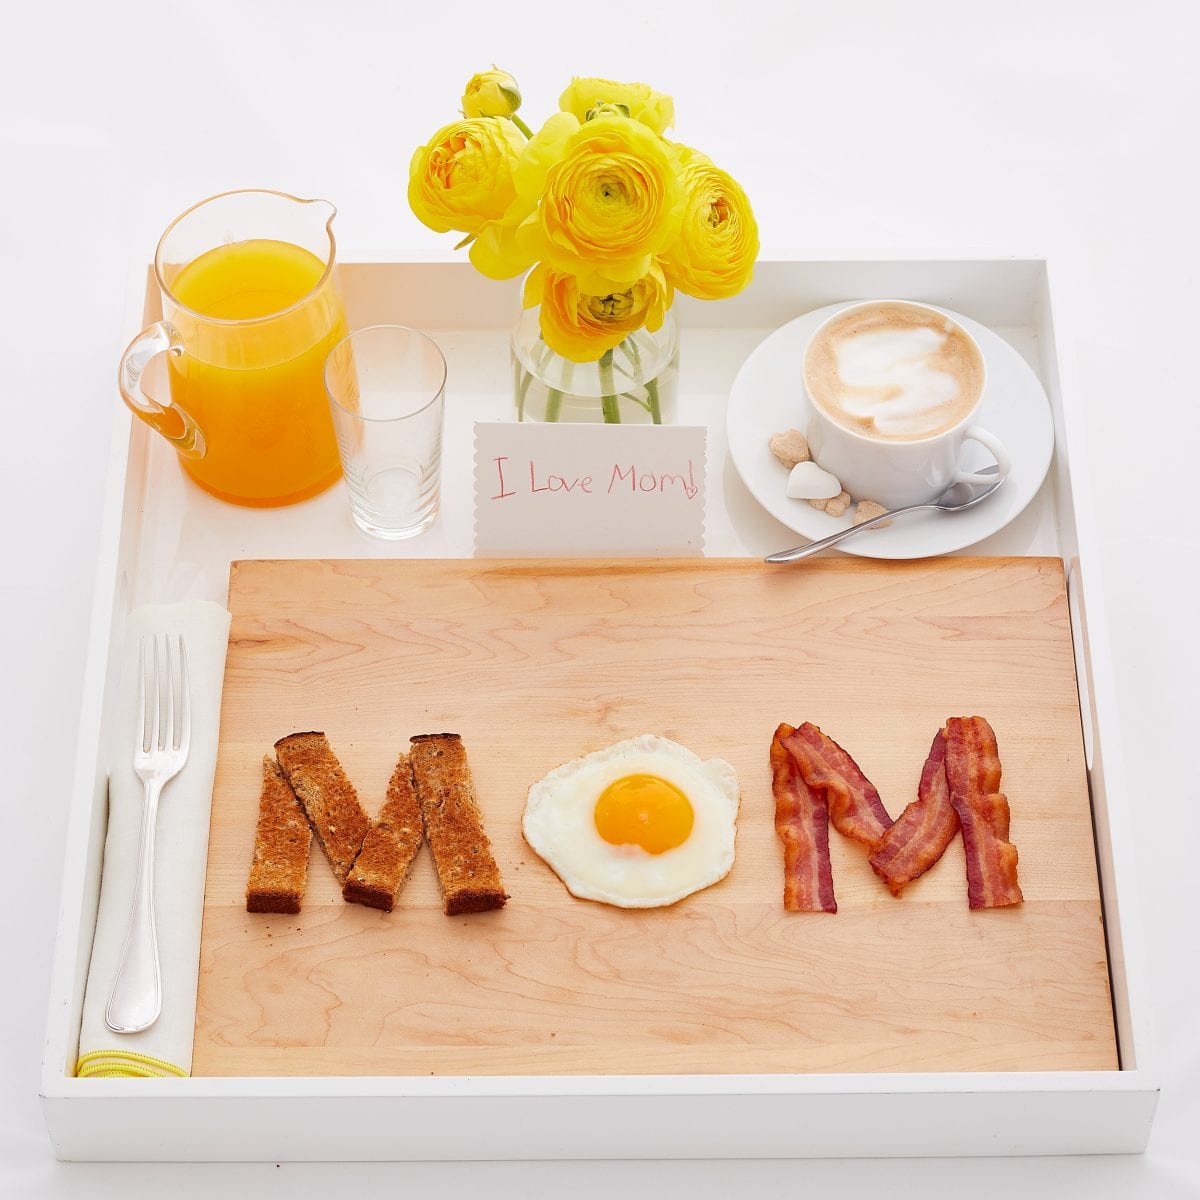 Darcy Miller, Darcy Miller Designs, Mother’s Day, breakfast in bed, play with your food, creative breakfast, birthday